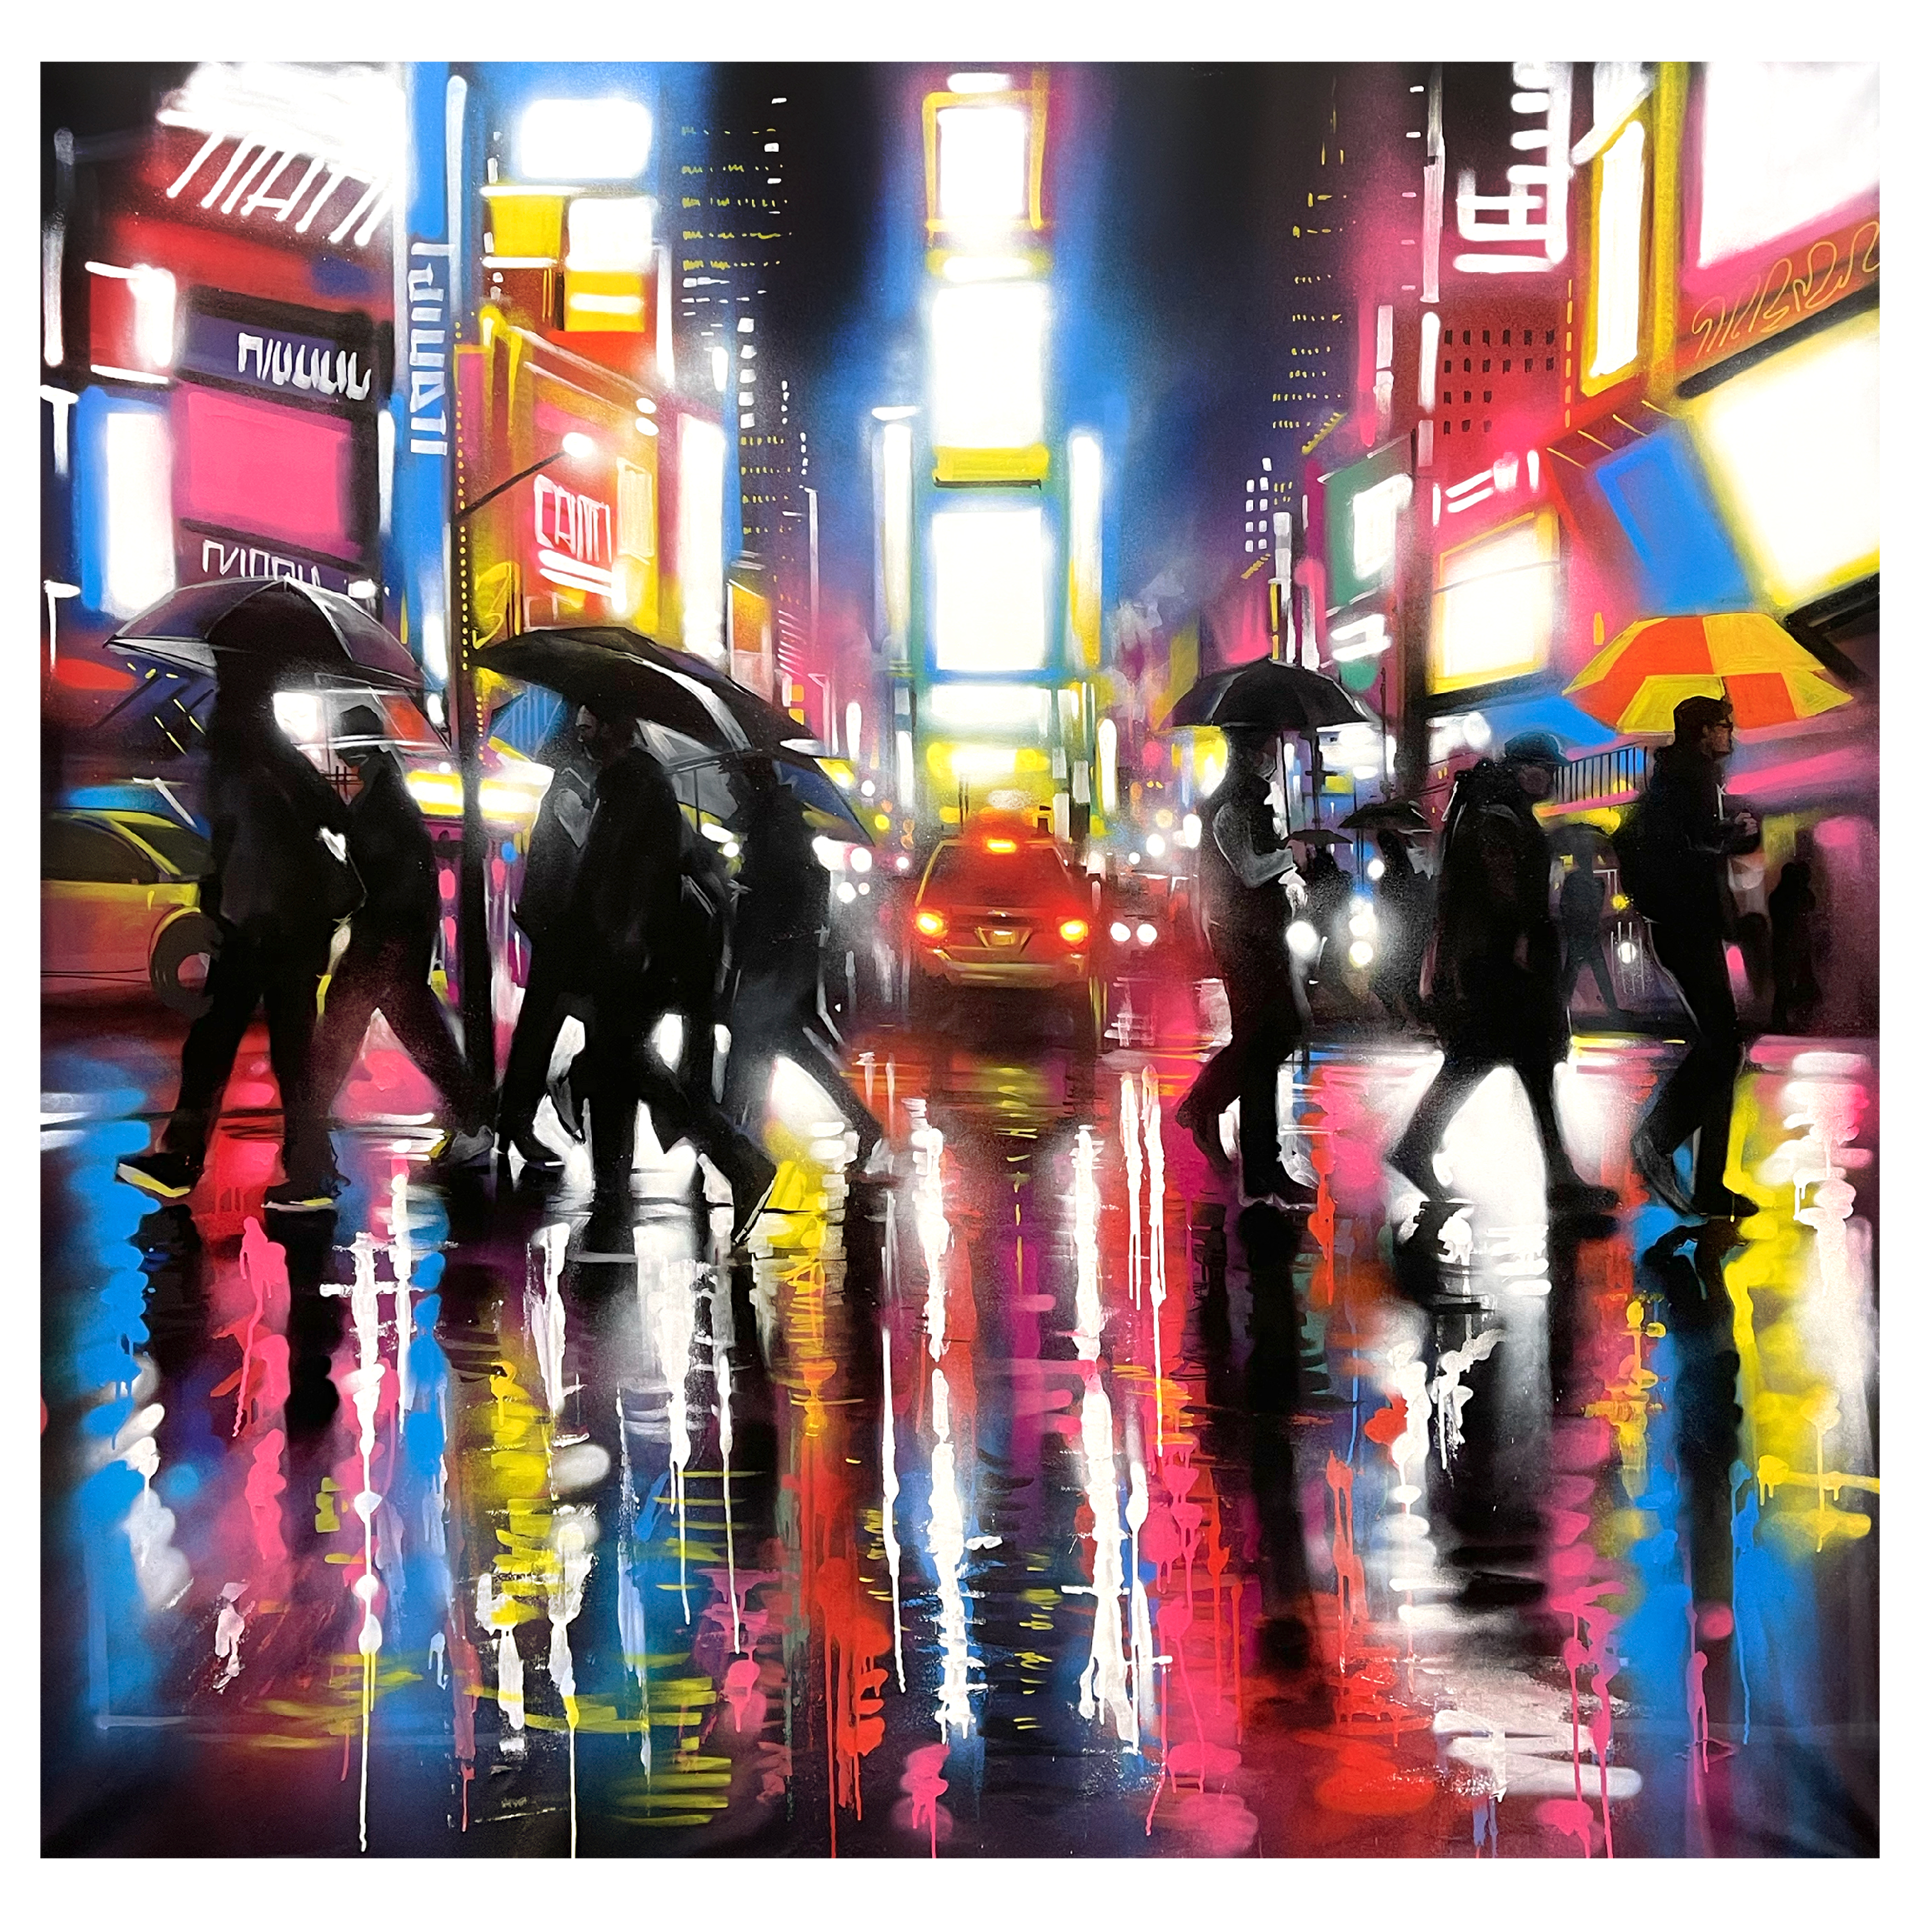 Times Square by Dan Kitchener